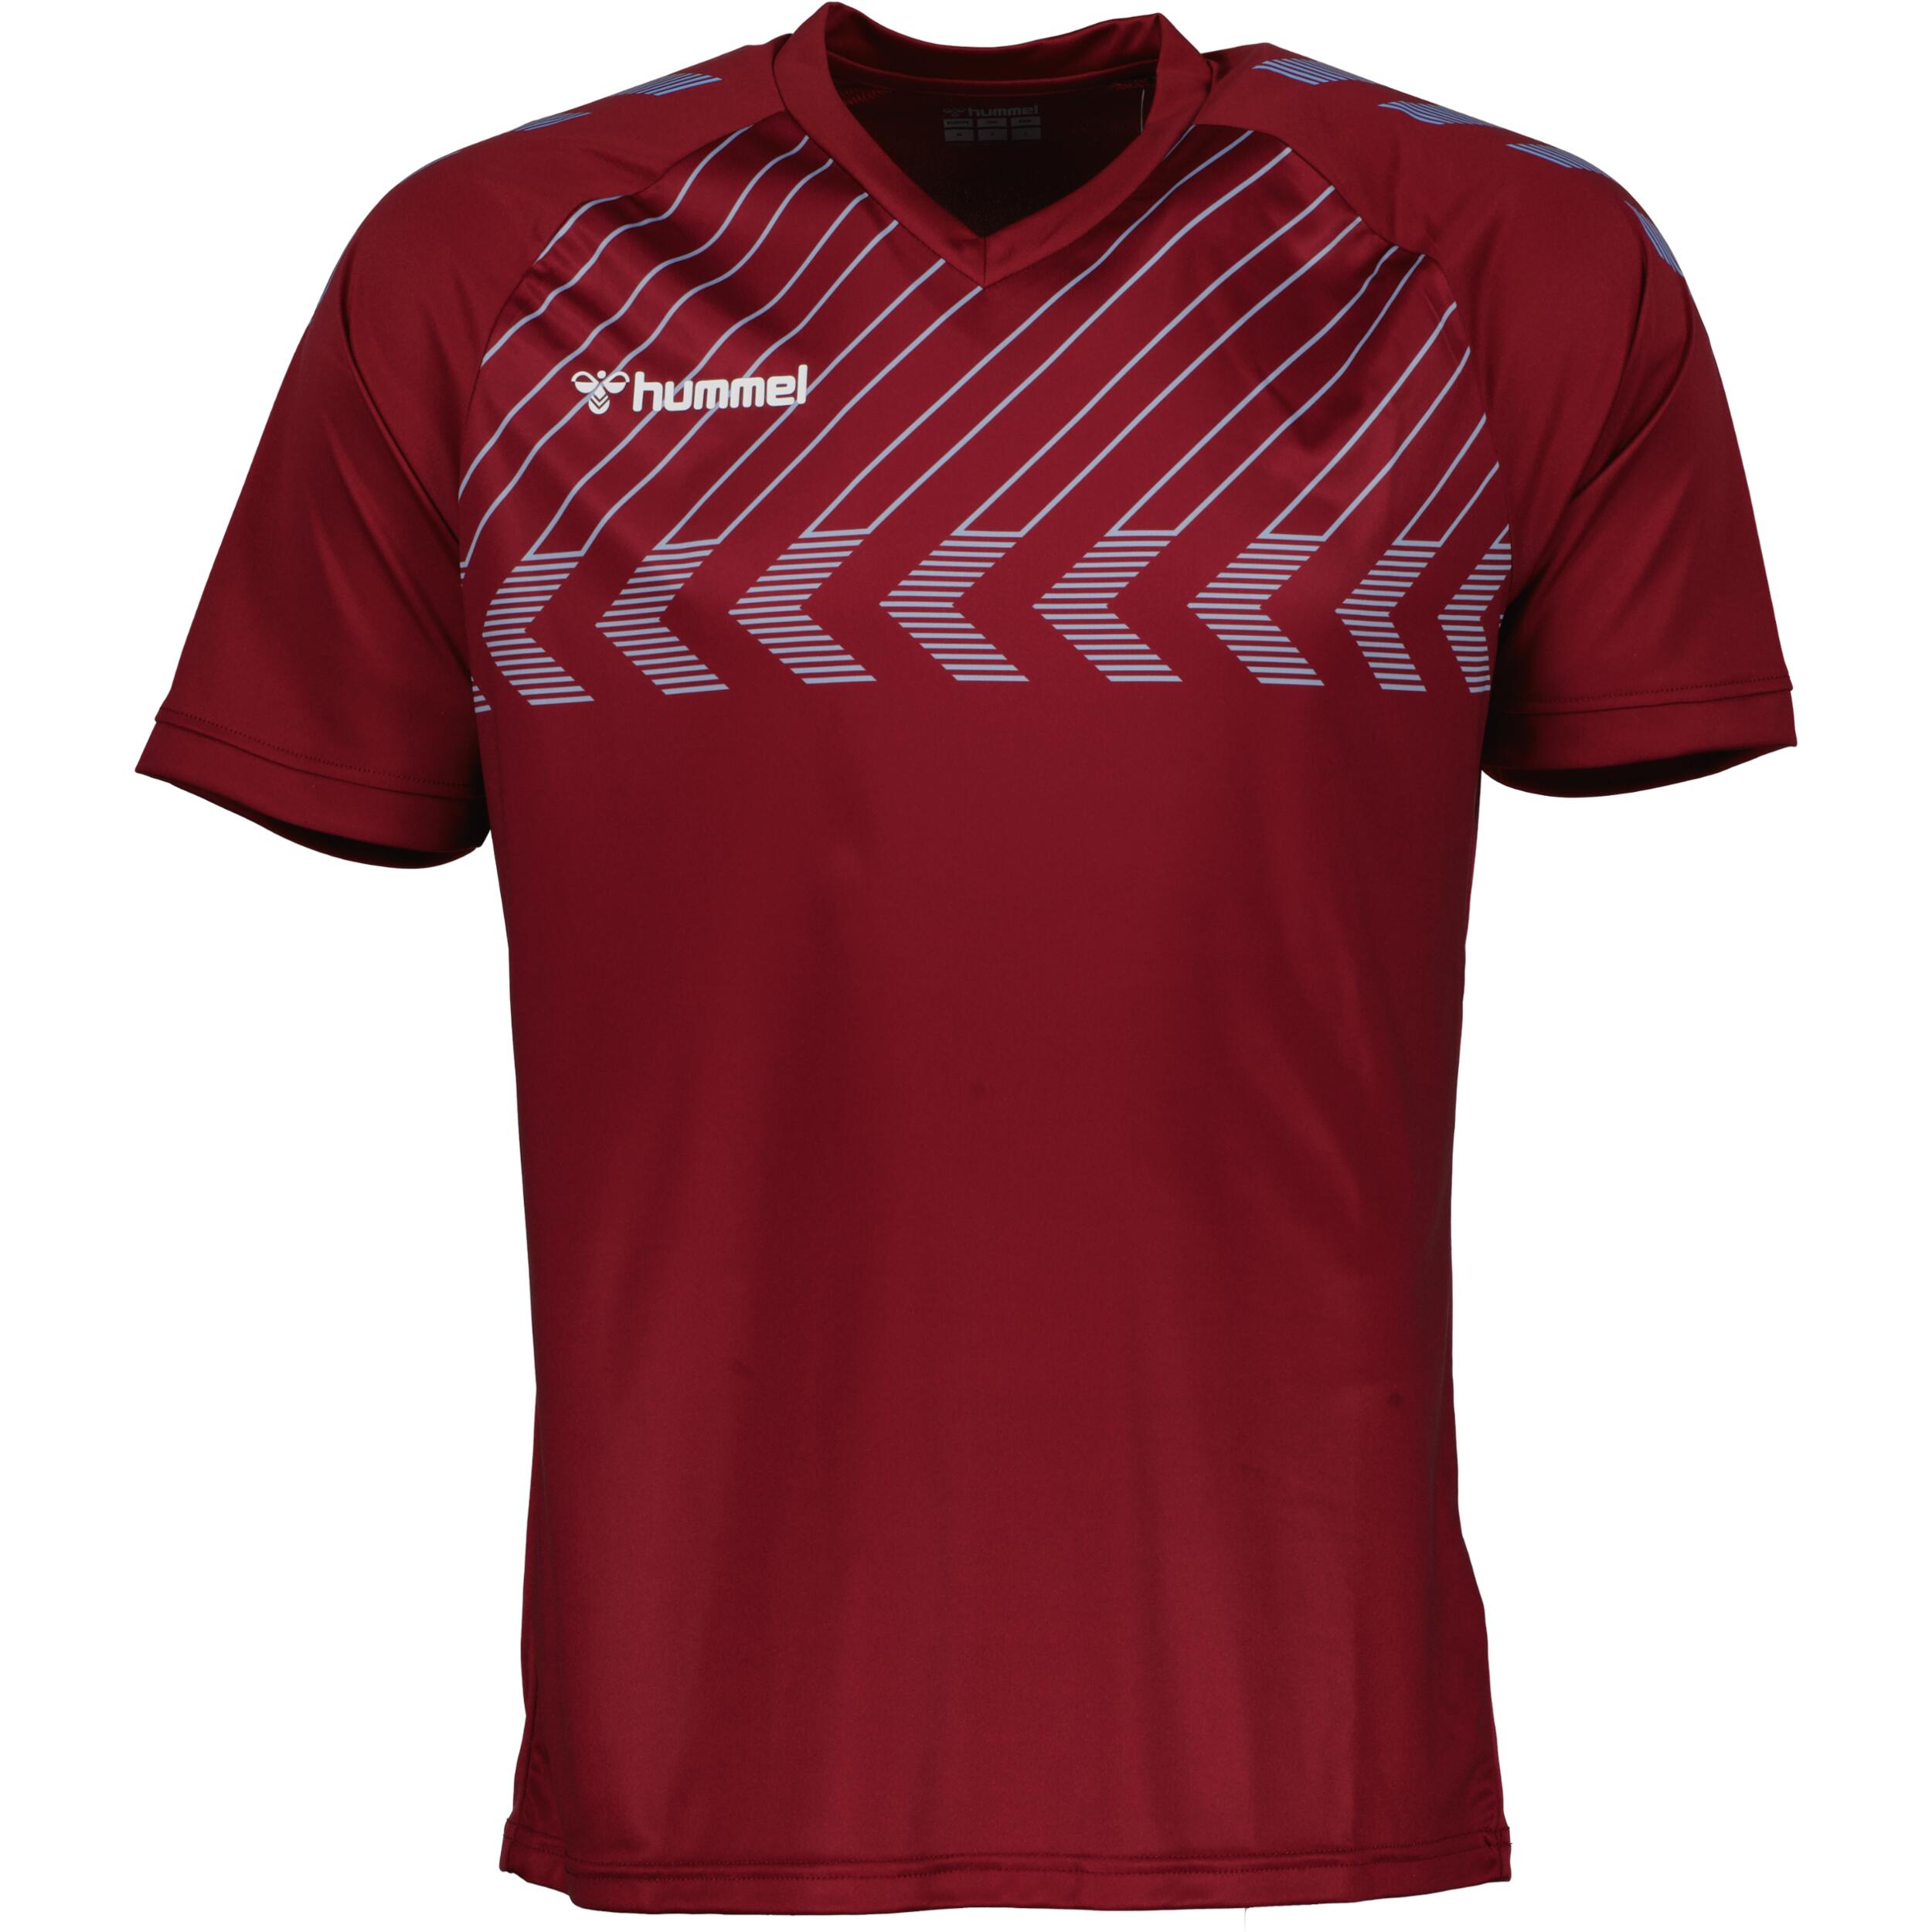 Poly jersey for kids, great for football, in maroon 1/3